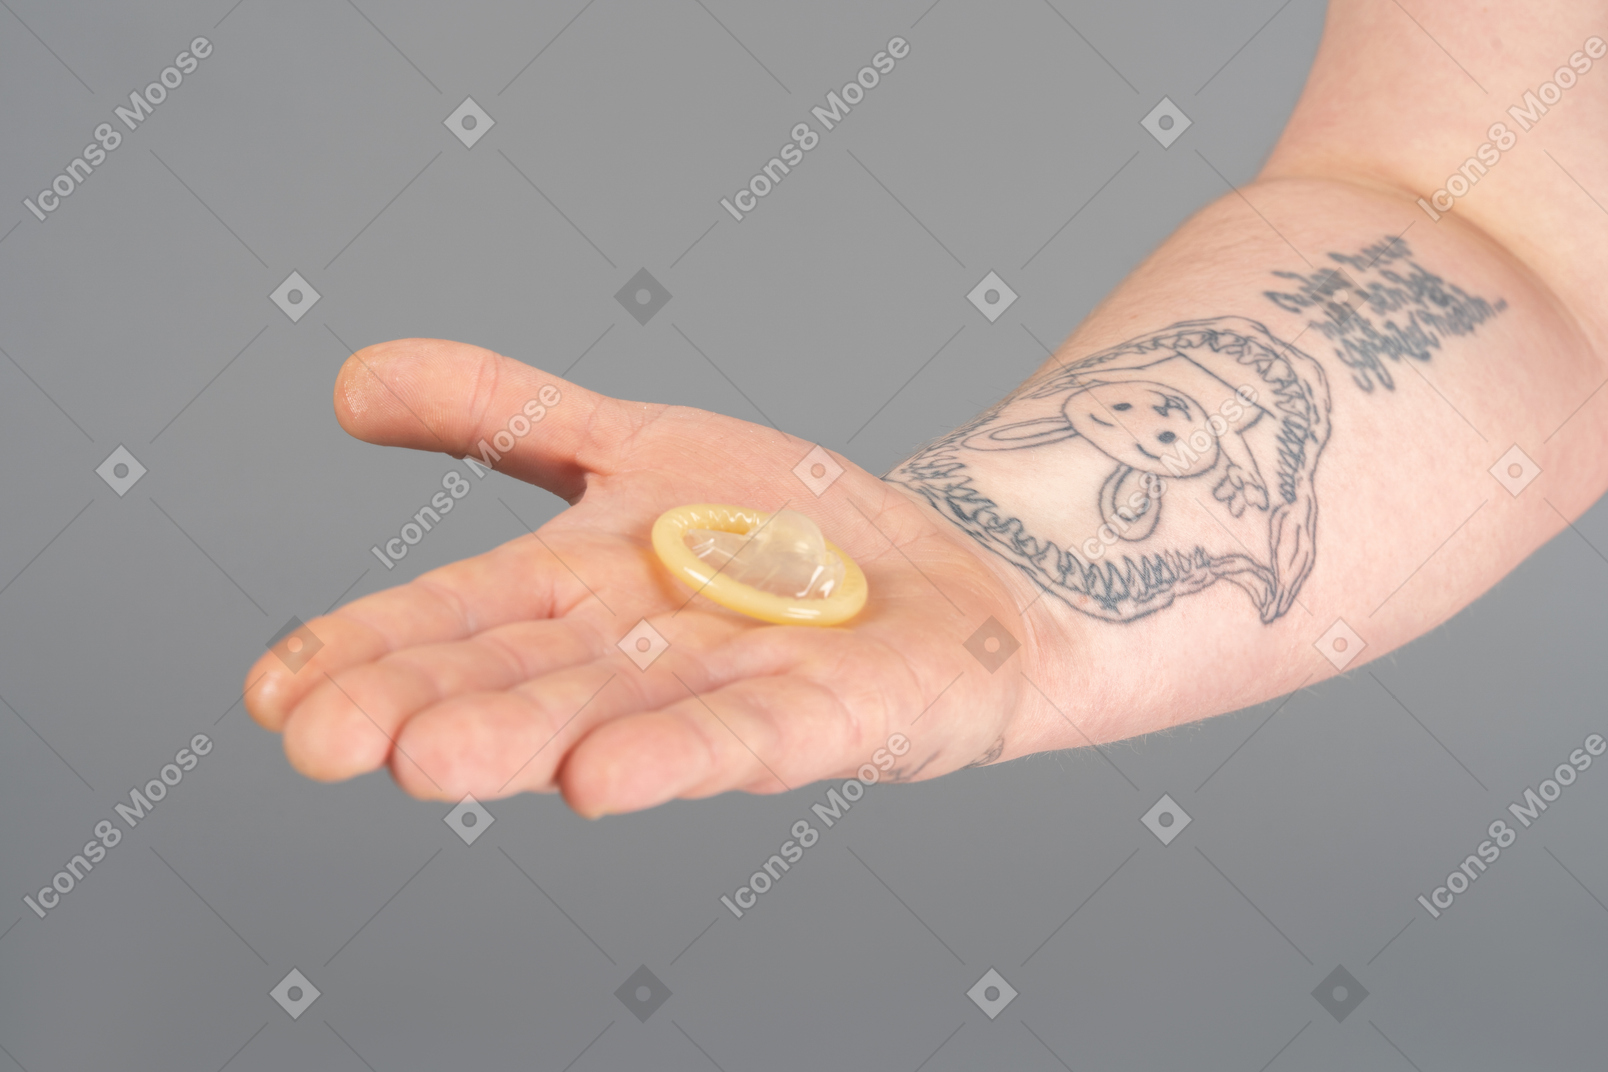 Holding a condom